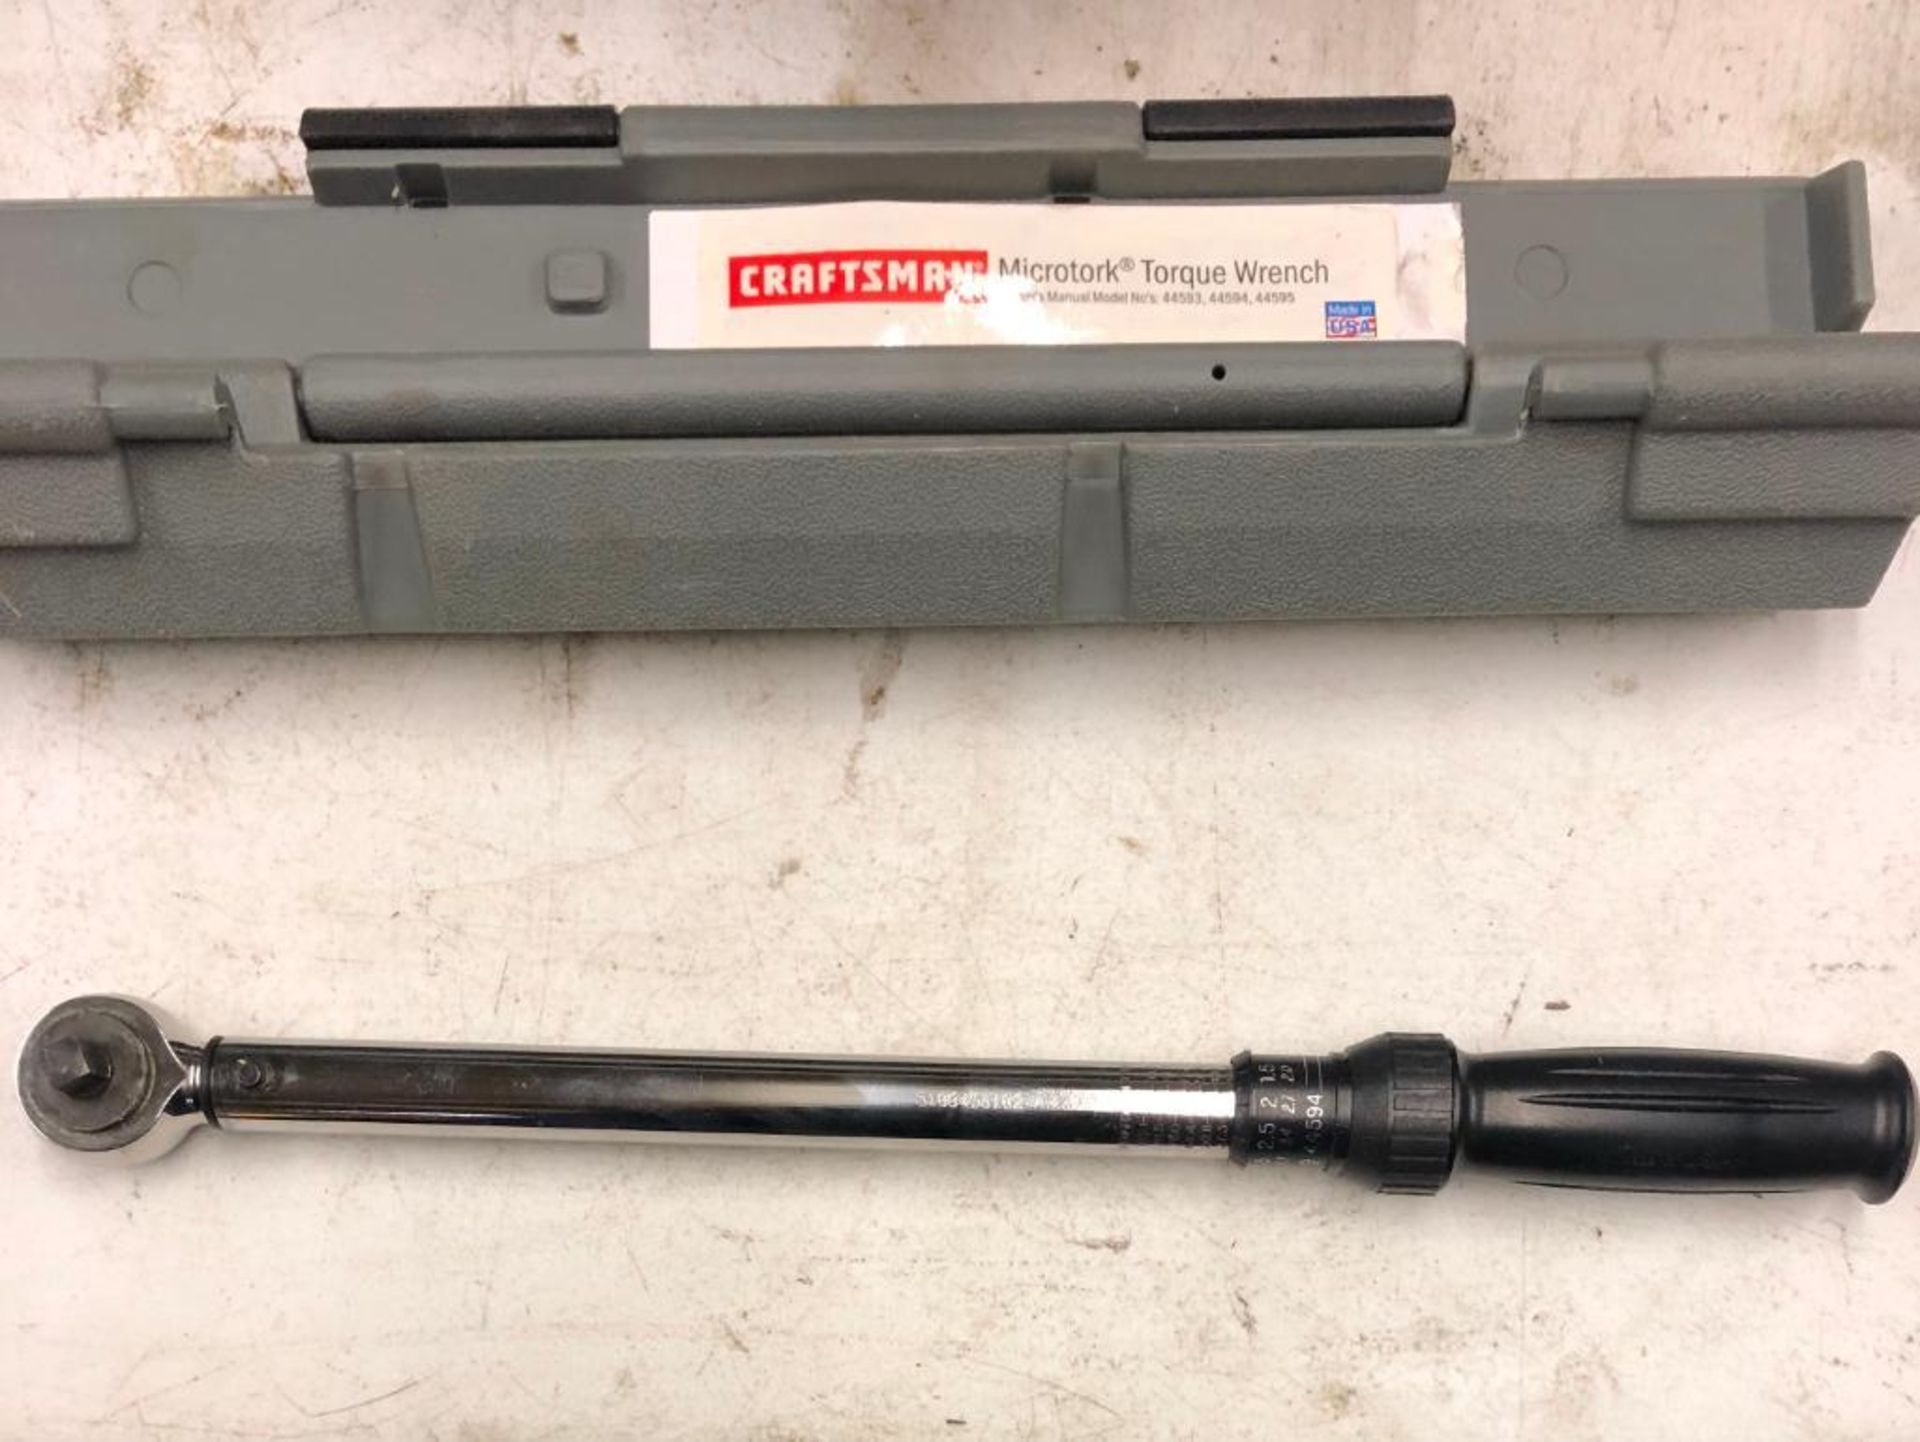 CRAFTSMAN MICROTORK TORQUE WRENCH, S/N 5103453102 - Image 2 of 3